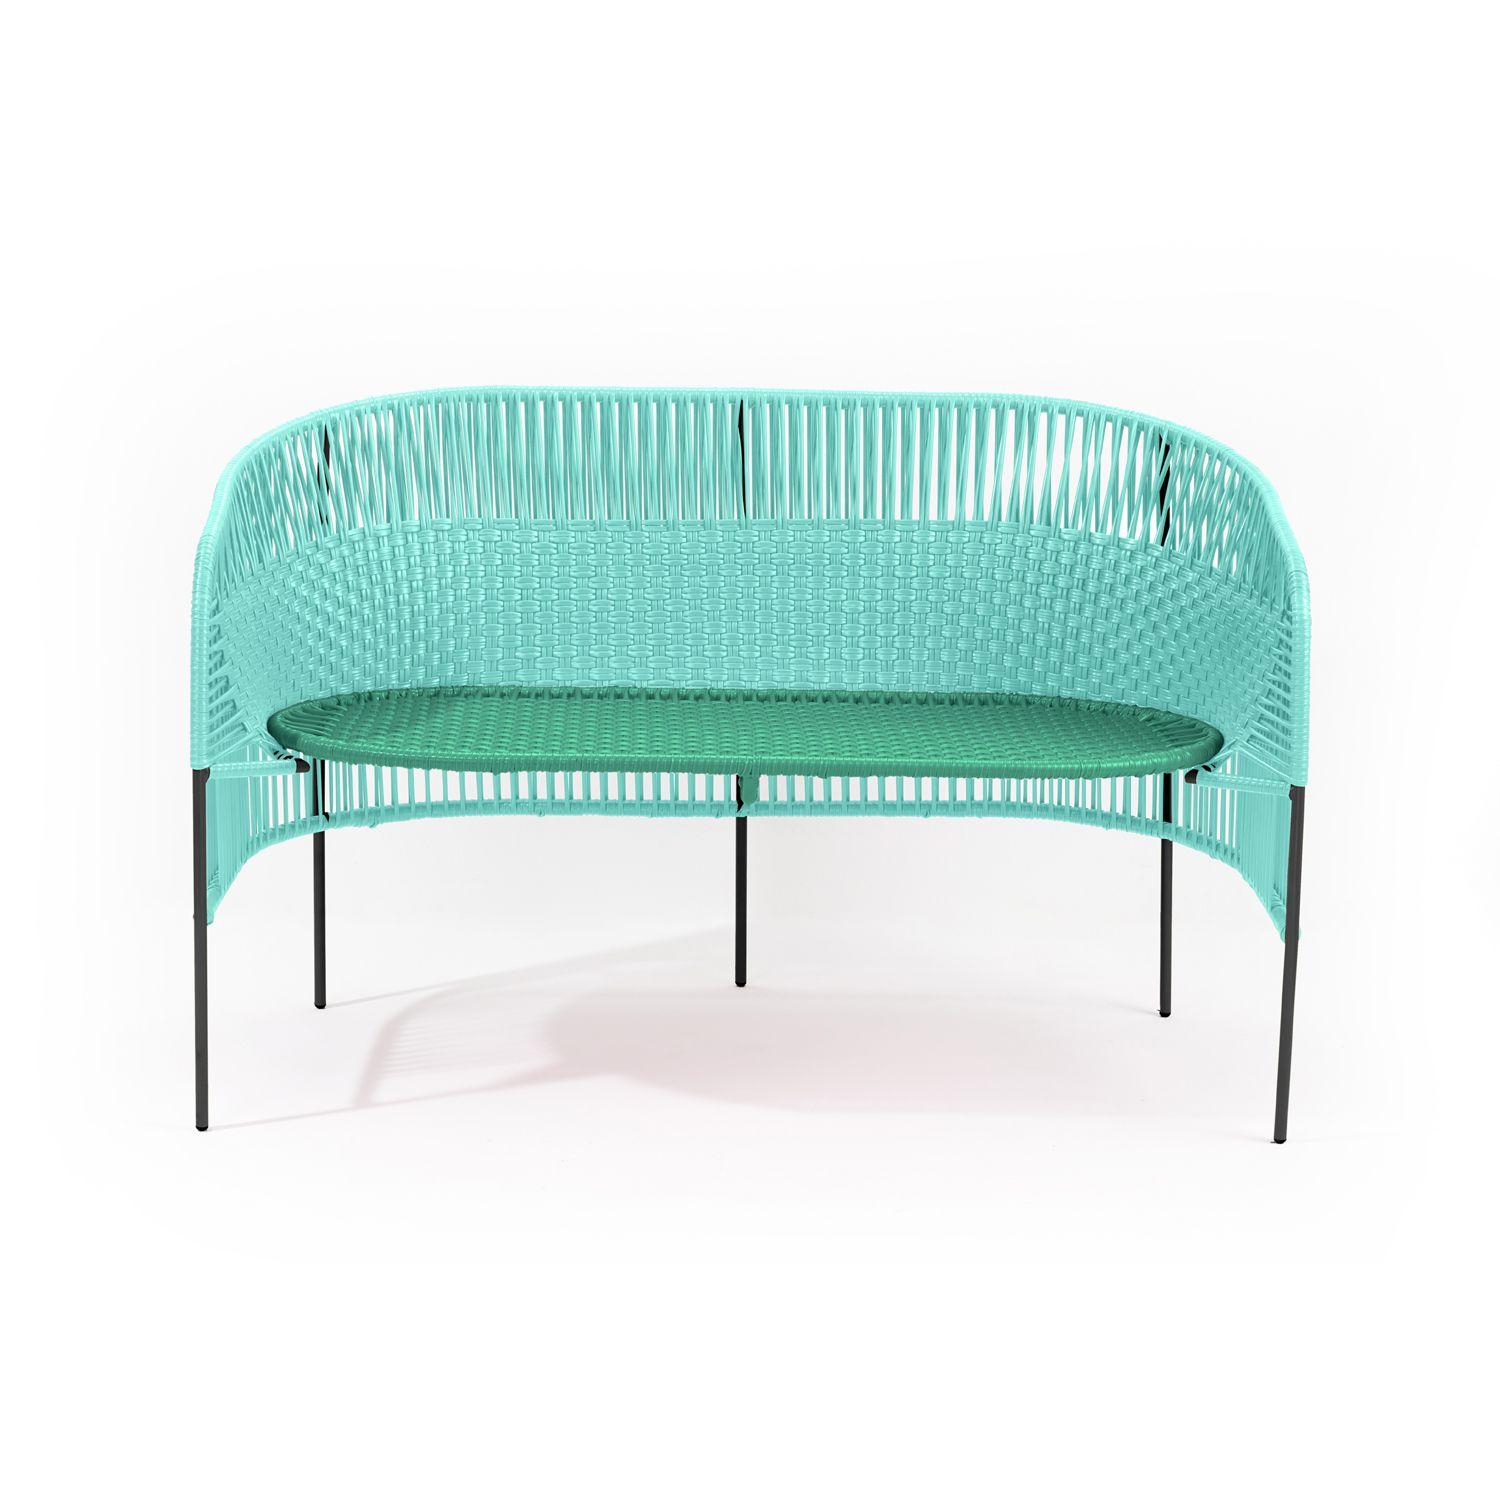 Ames Caribe 2 Seater Outdoor Bench by Sebastian Herkner In New Condition For Sale In New York, NY